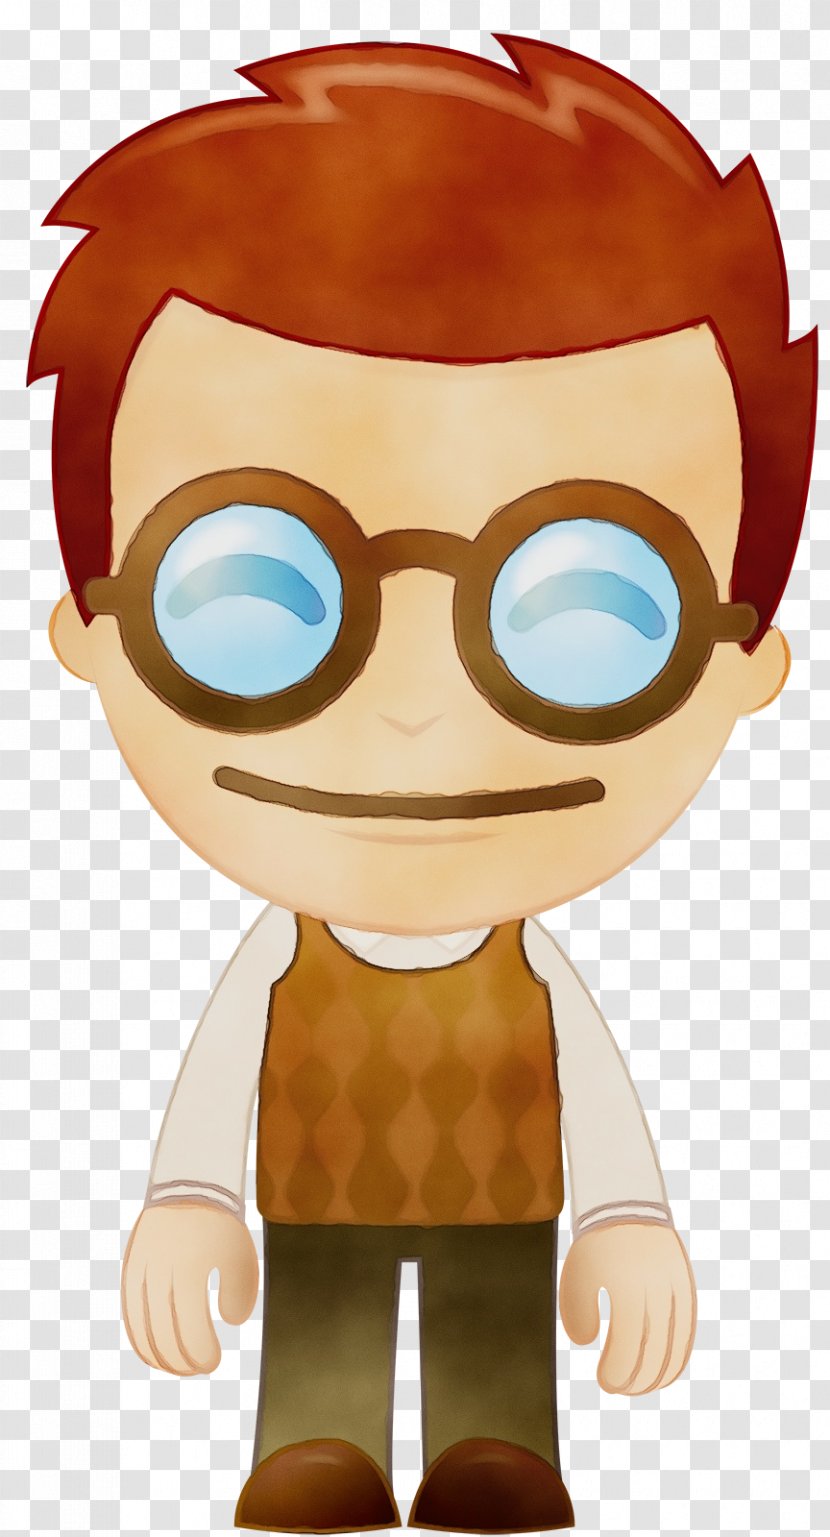 Glasses Drawing - Style Animation Transparent PNG